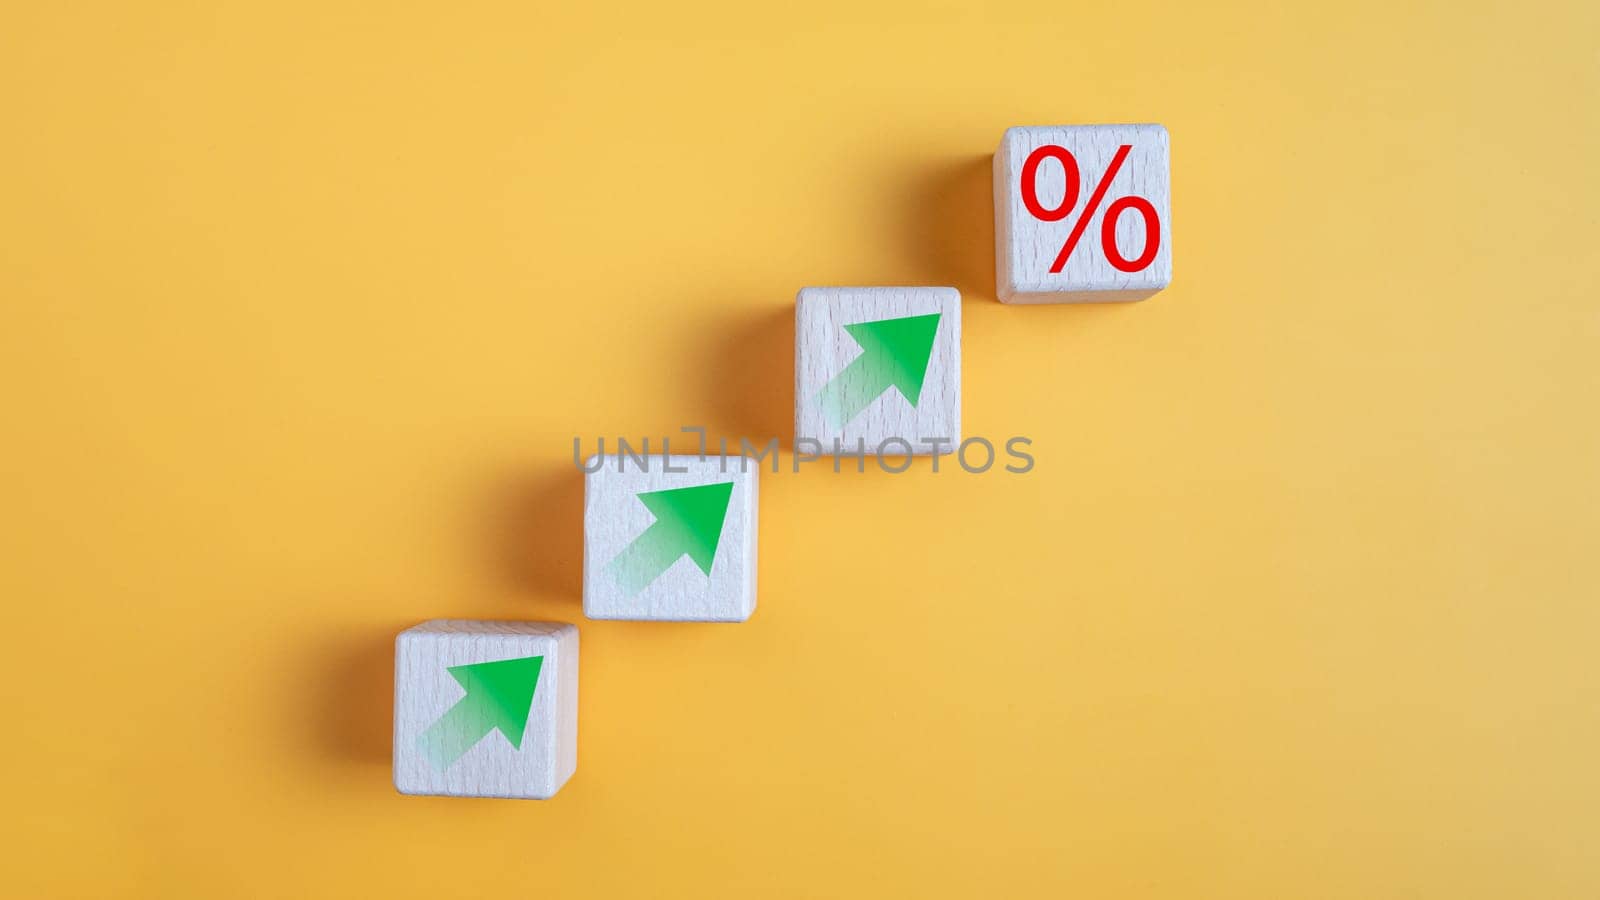 Wooden block with percentage symbol and up arrow on yellow background. Interest rate and dividend concept,  return on stocks and mutual funds, long term investment for retirement. by Unimages2527